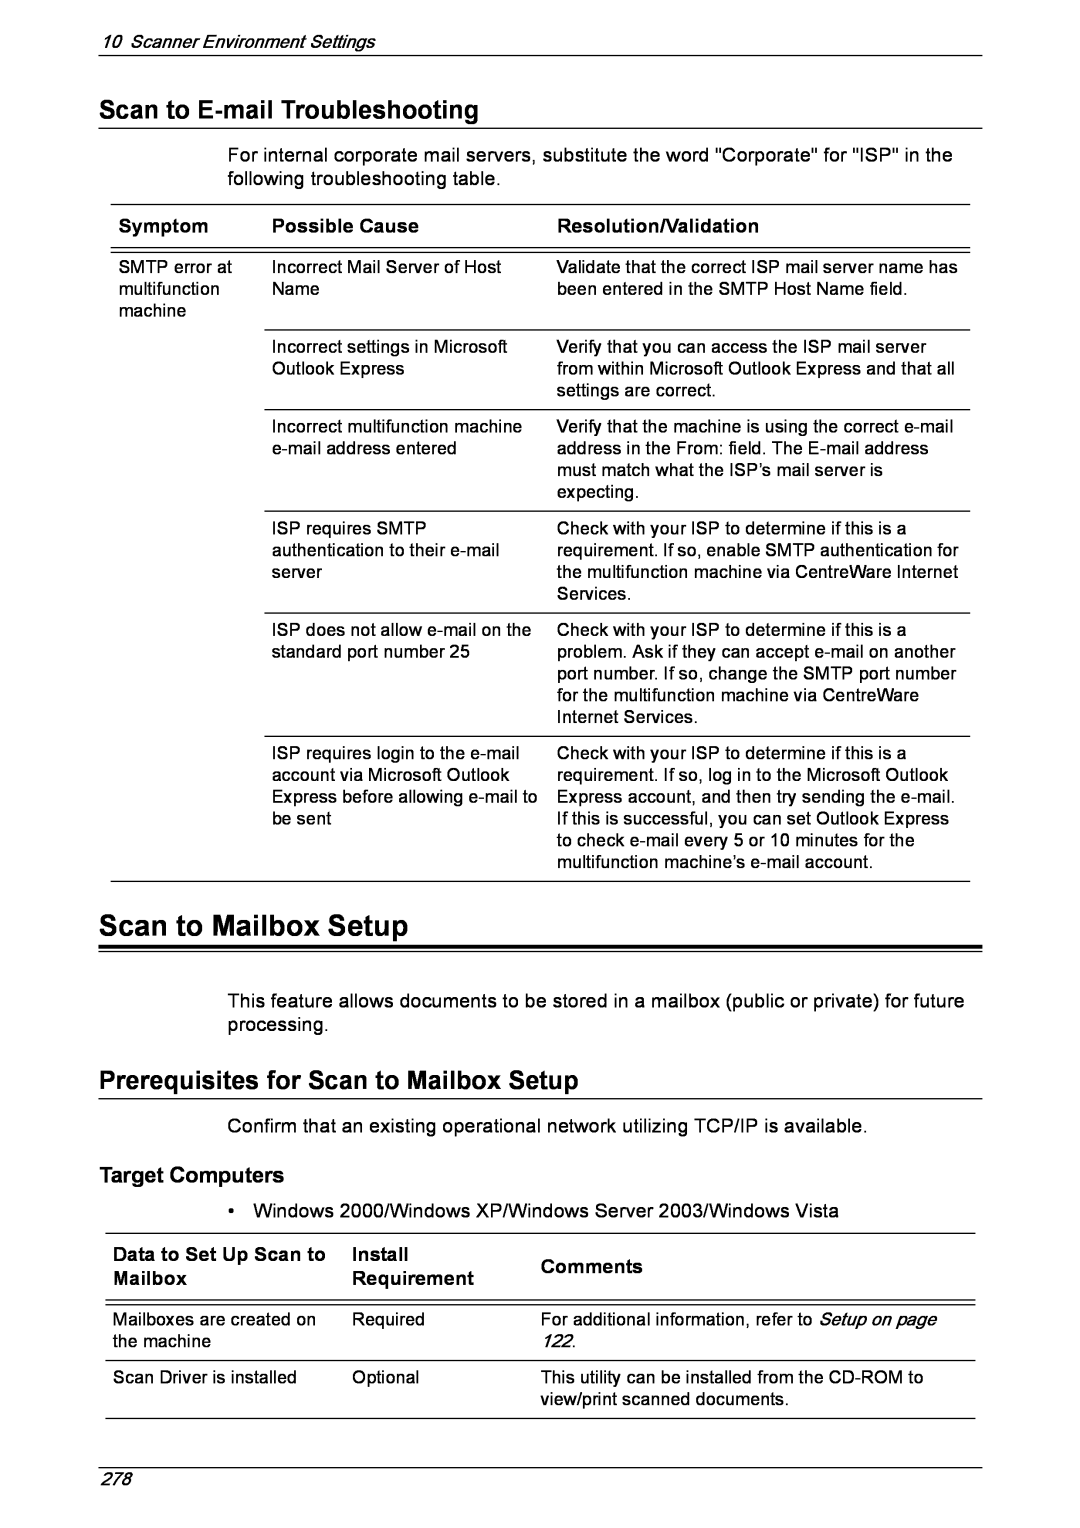 Xerox 5222 Scan to E-mailTroubleshooting, Prerequisites for Scan to Mailbox Setup, Symptom, Possible Cause, Install 